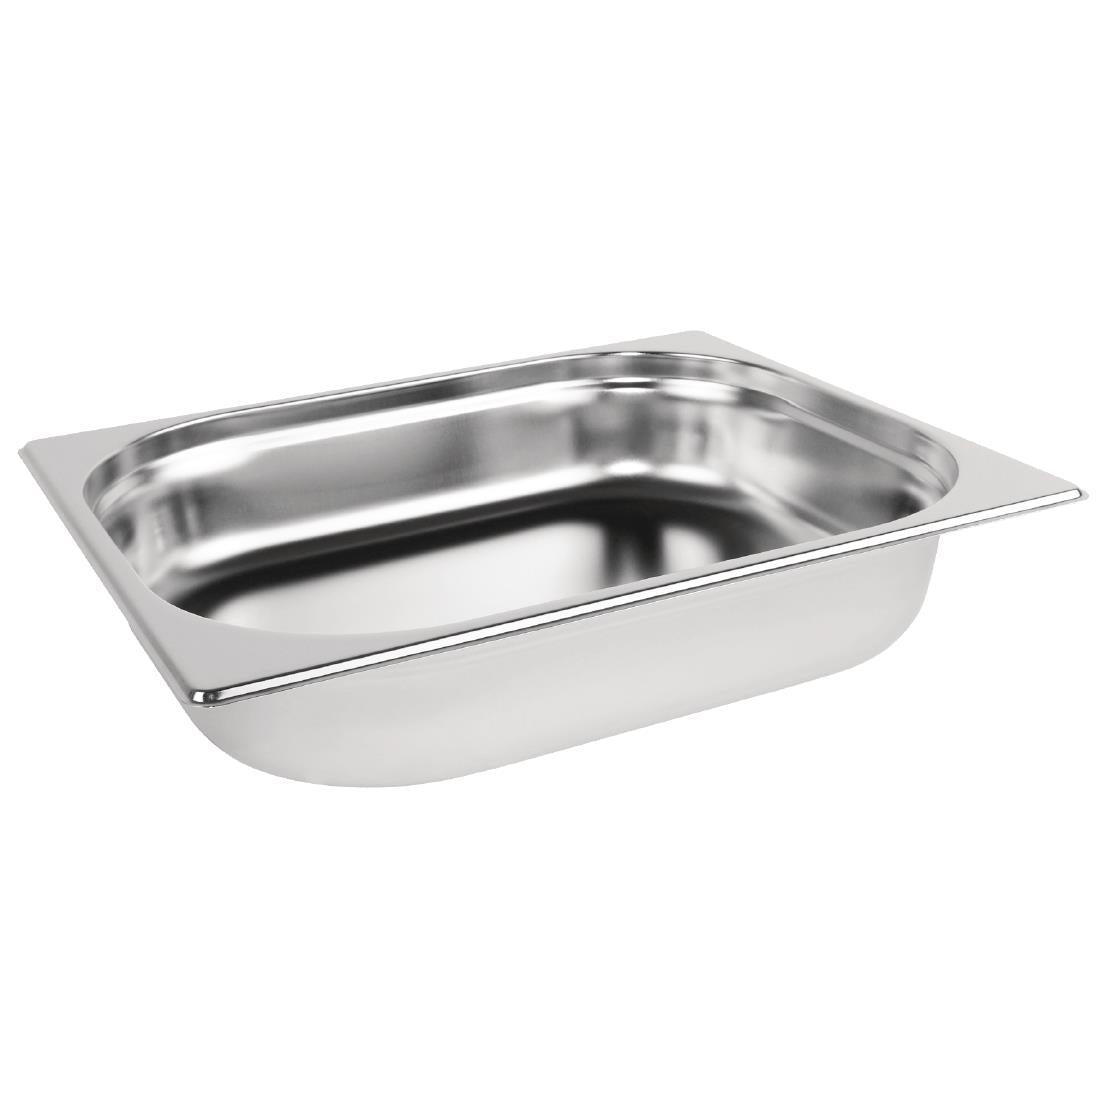 Vogue Stainless Steel 1/2 Gastronorm Tray 40mm - HospoStore